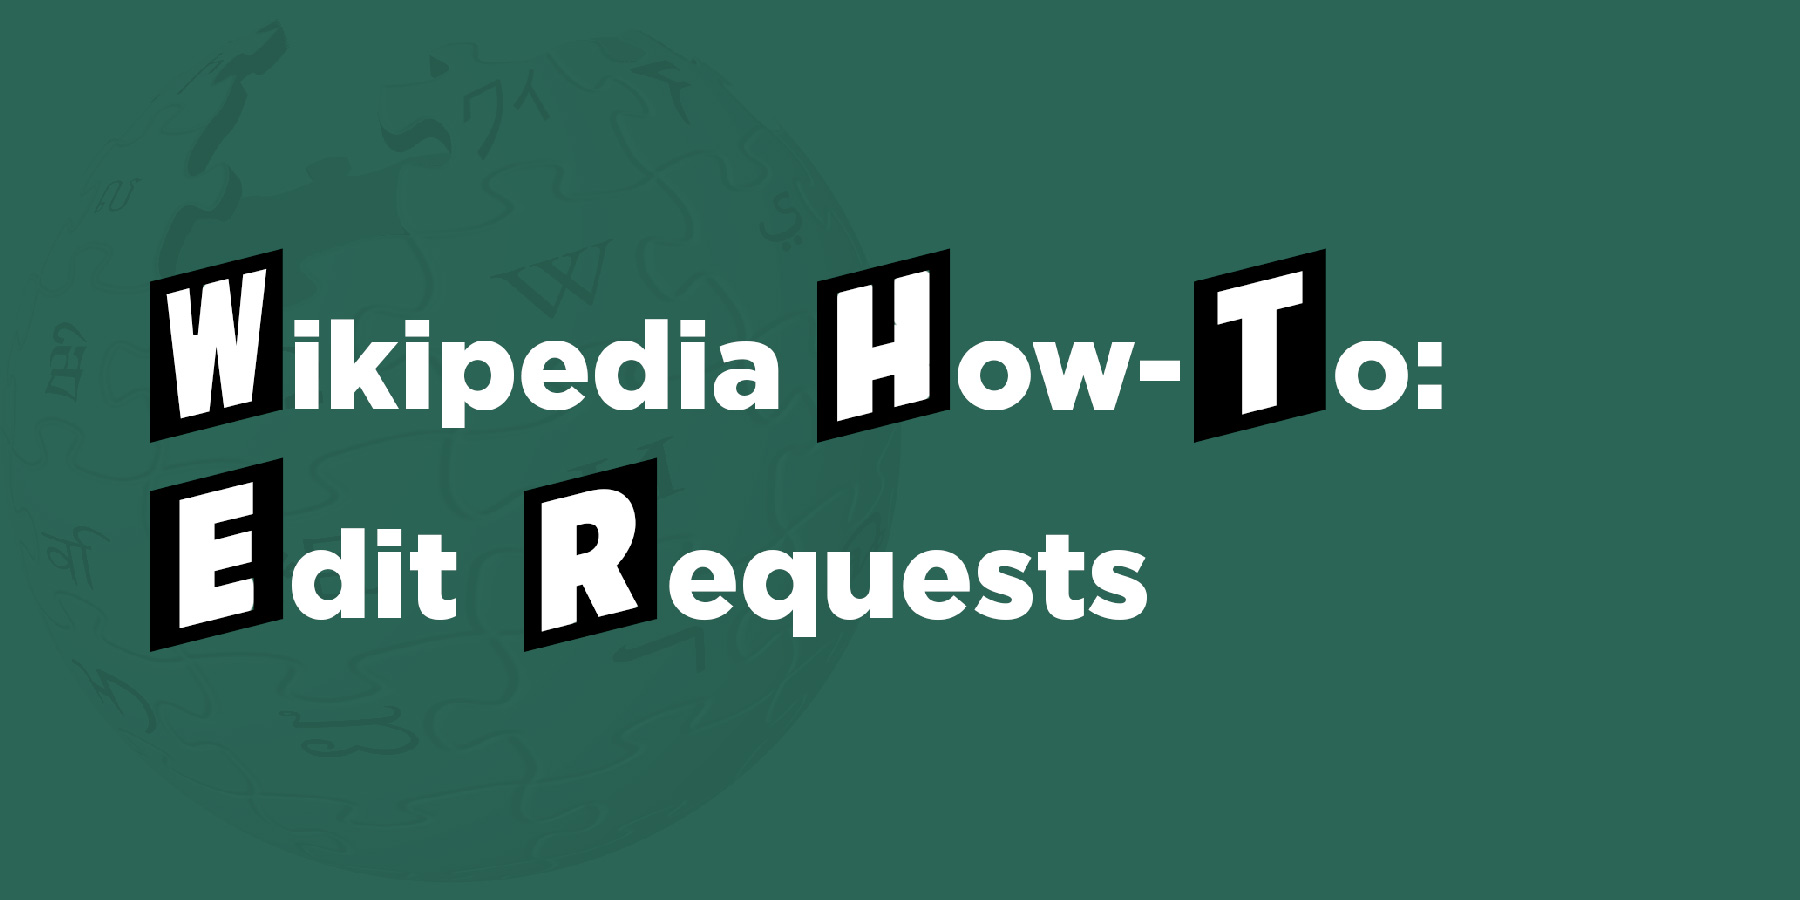 Wikipedia How-To: Edit Requests